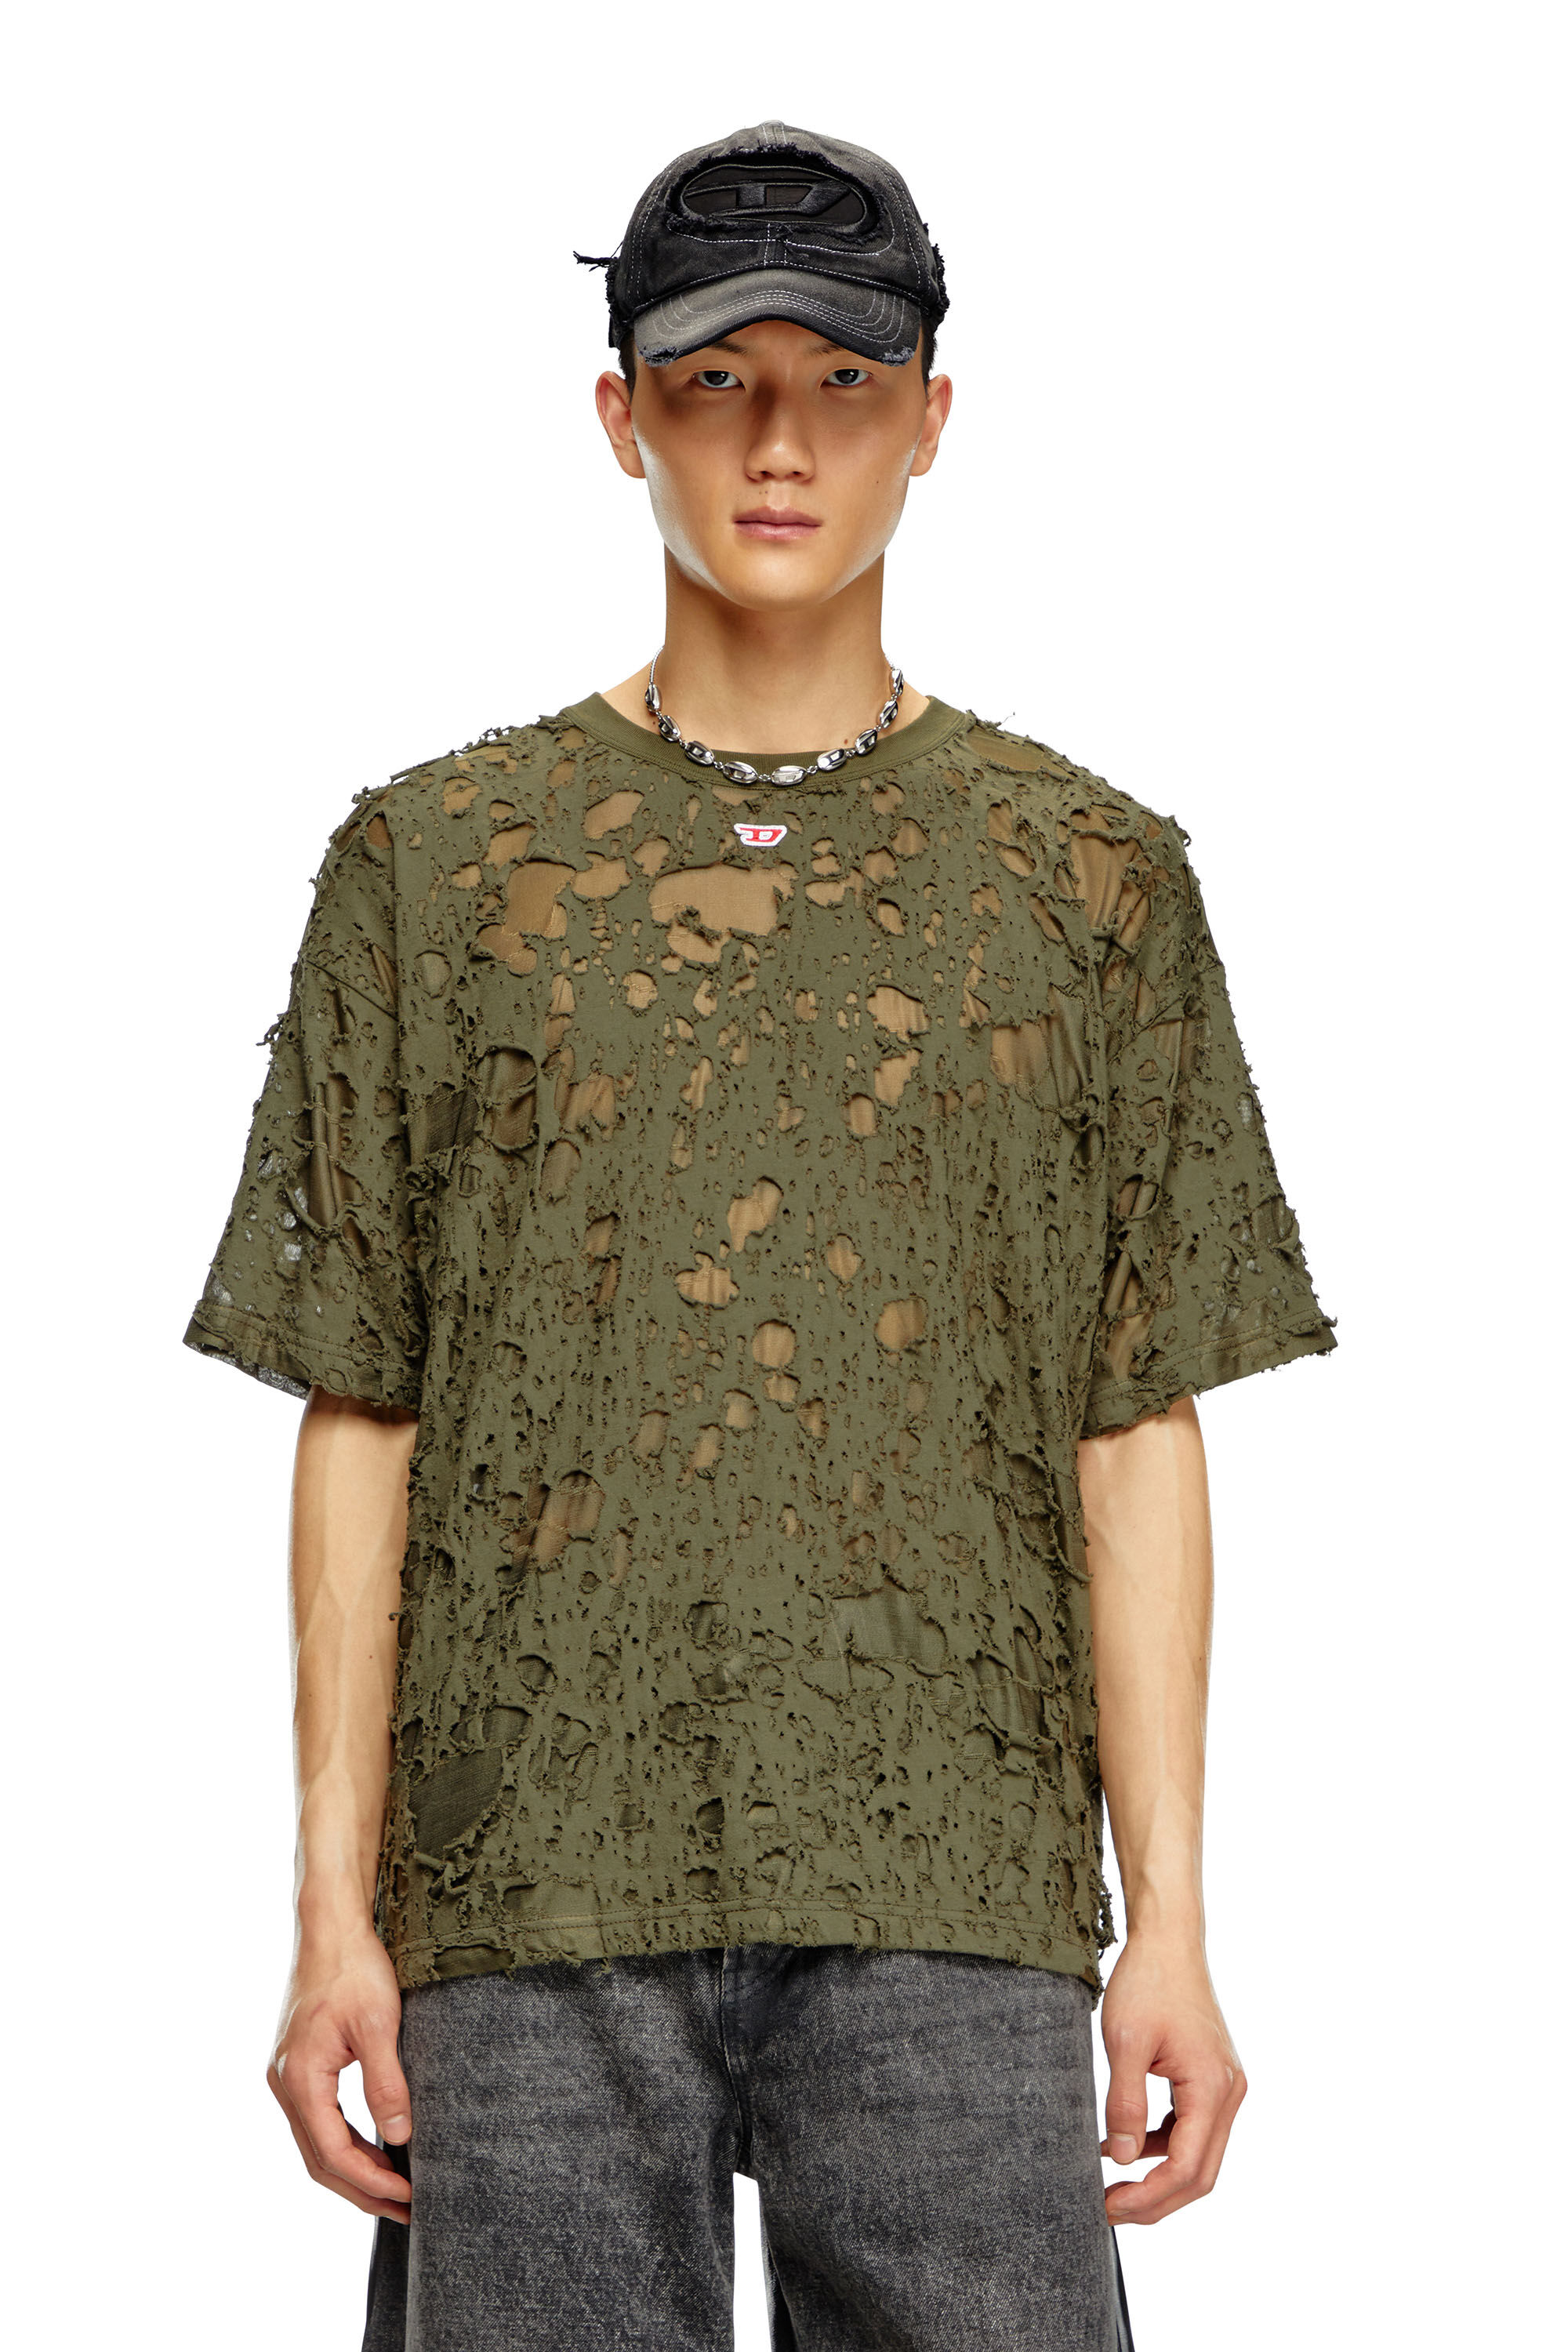 Diesel - T-BOXT-Q3, Male Layered T-shirt with burn-out finish in グリーン - Image 3